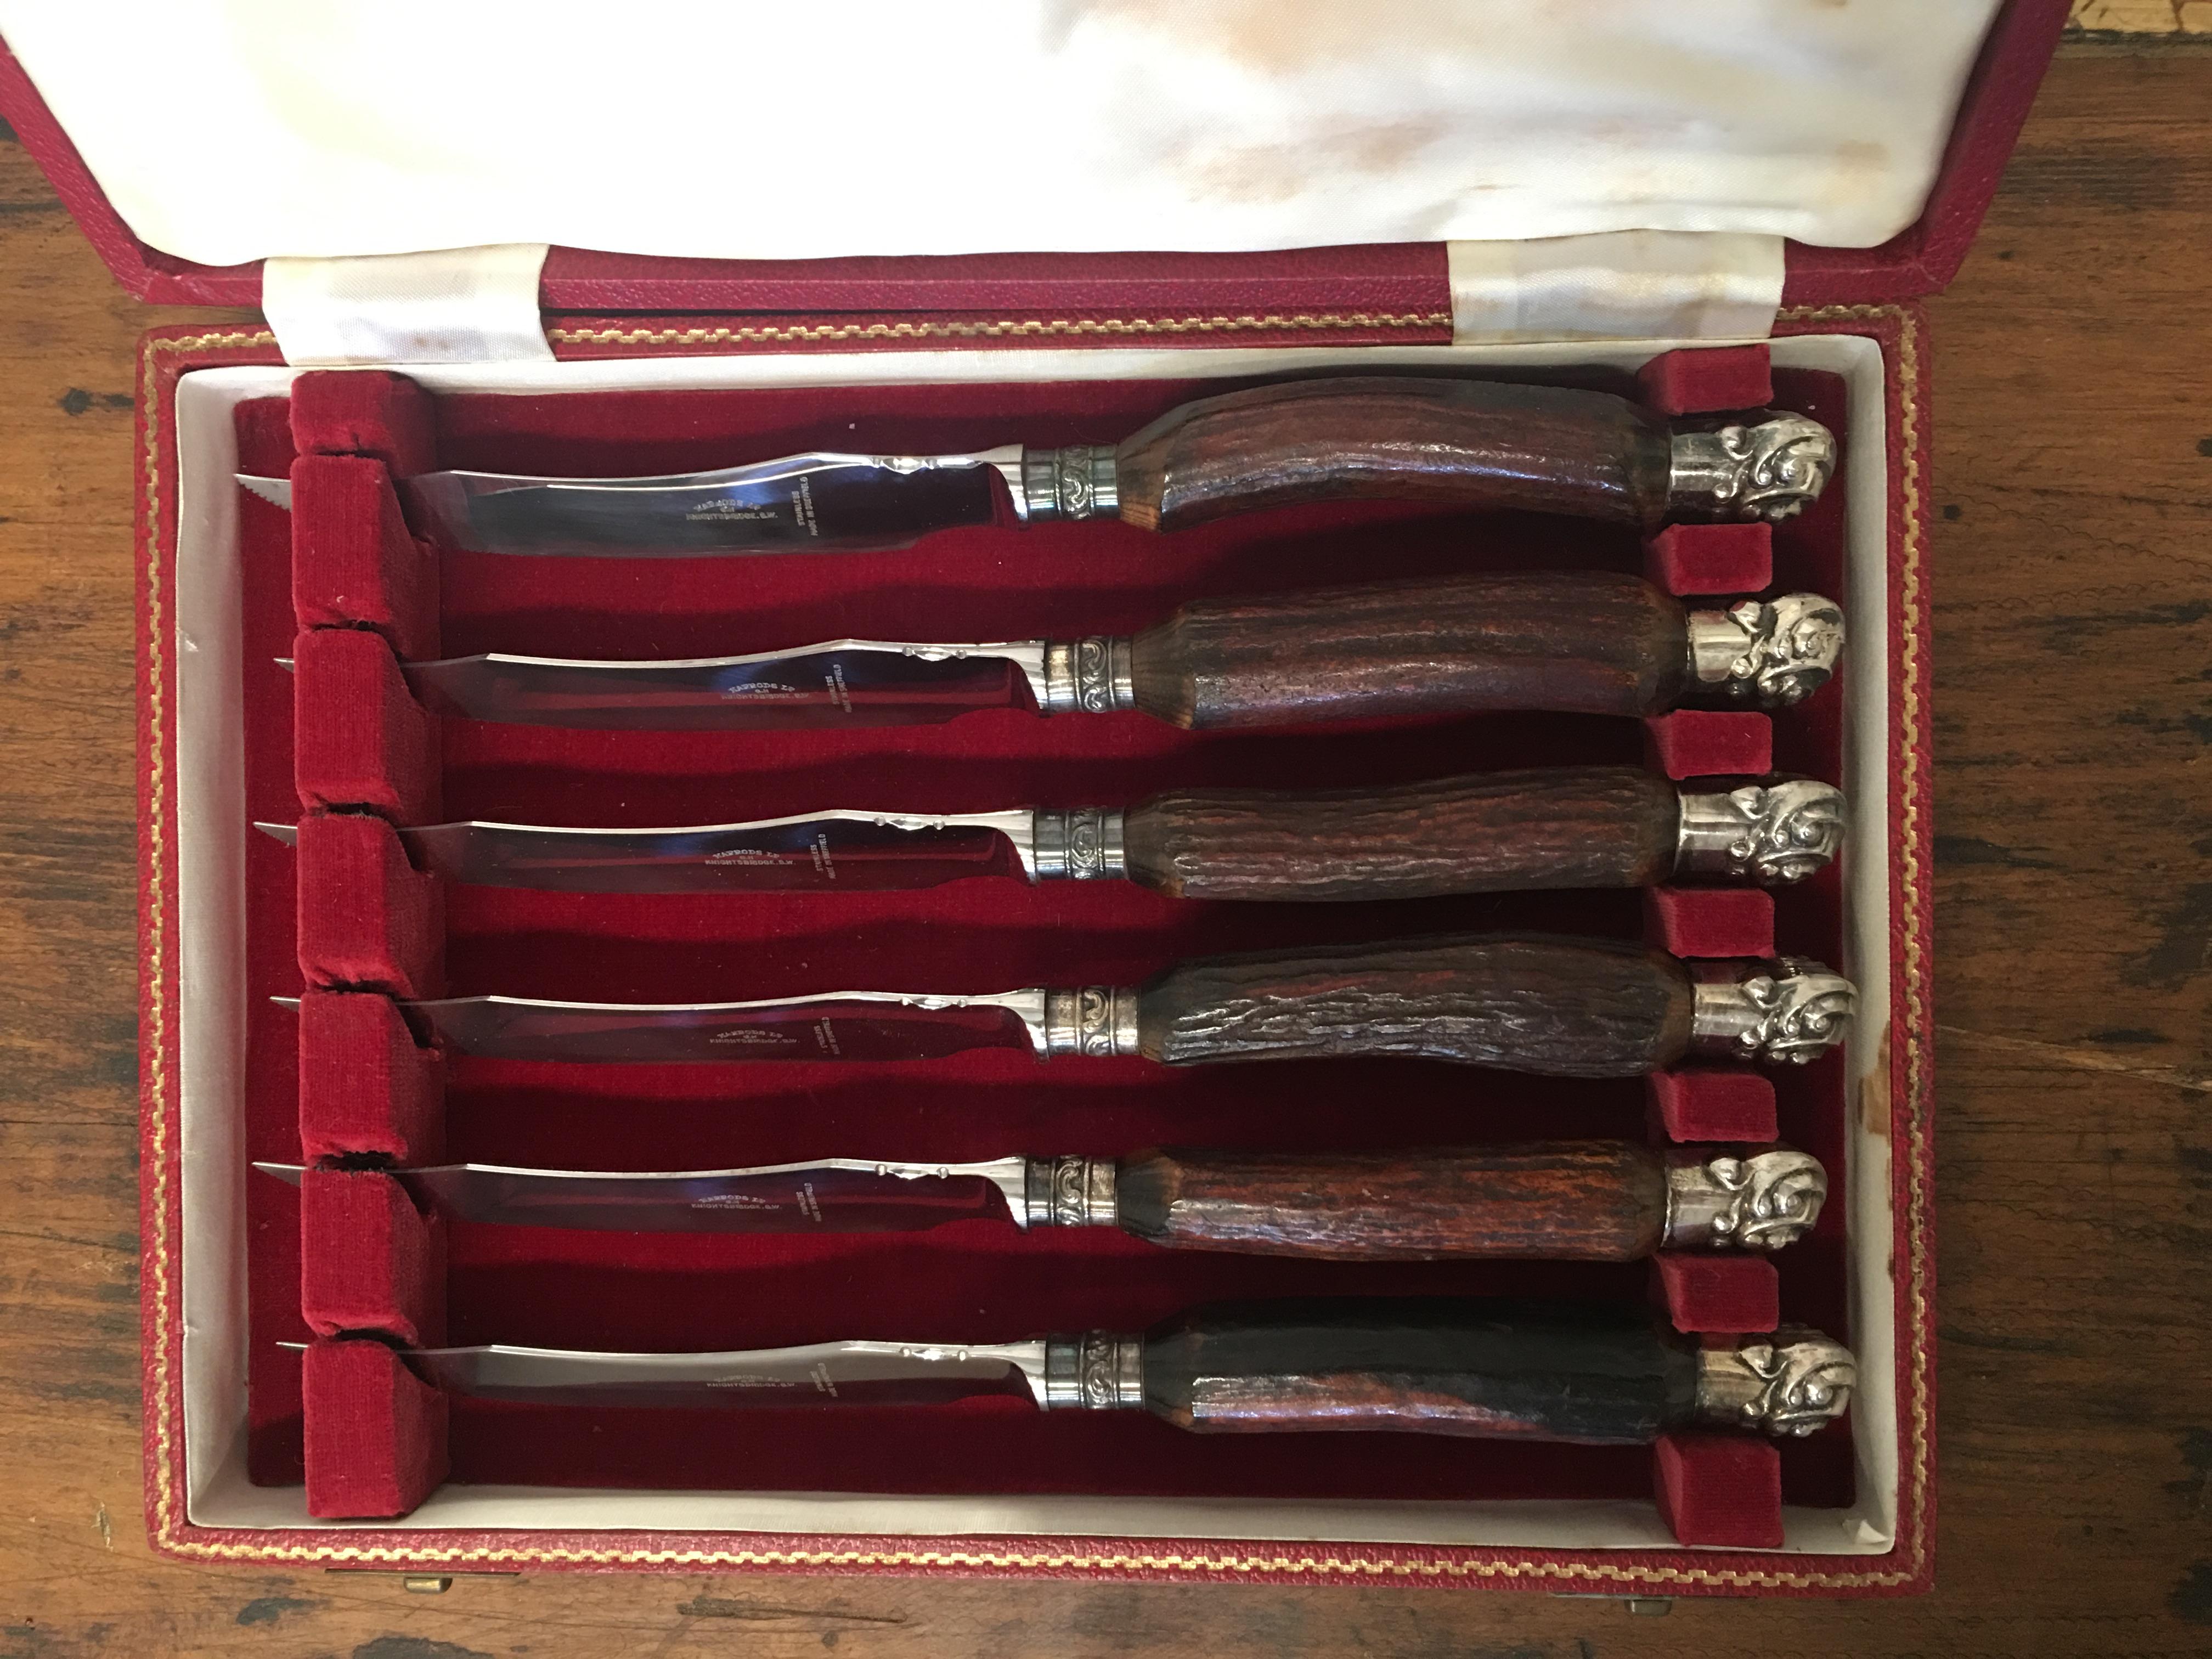 Victorian by Gee Holmes ltd. English (Harrods at Knight bridge) sterling silver, stainless steel and horn knife carving set, six pieces.


Measures: Long knife 9.44 in.